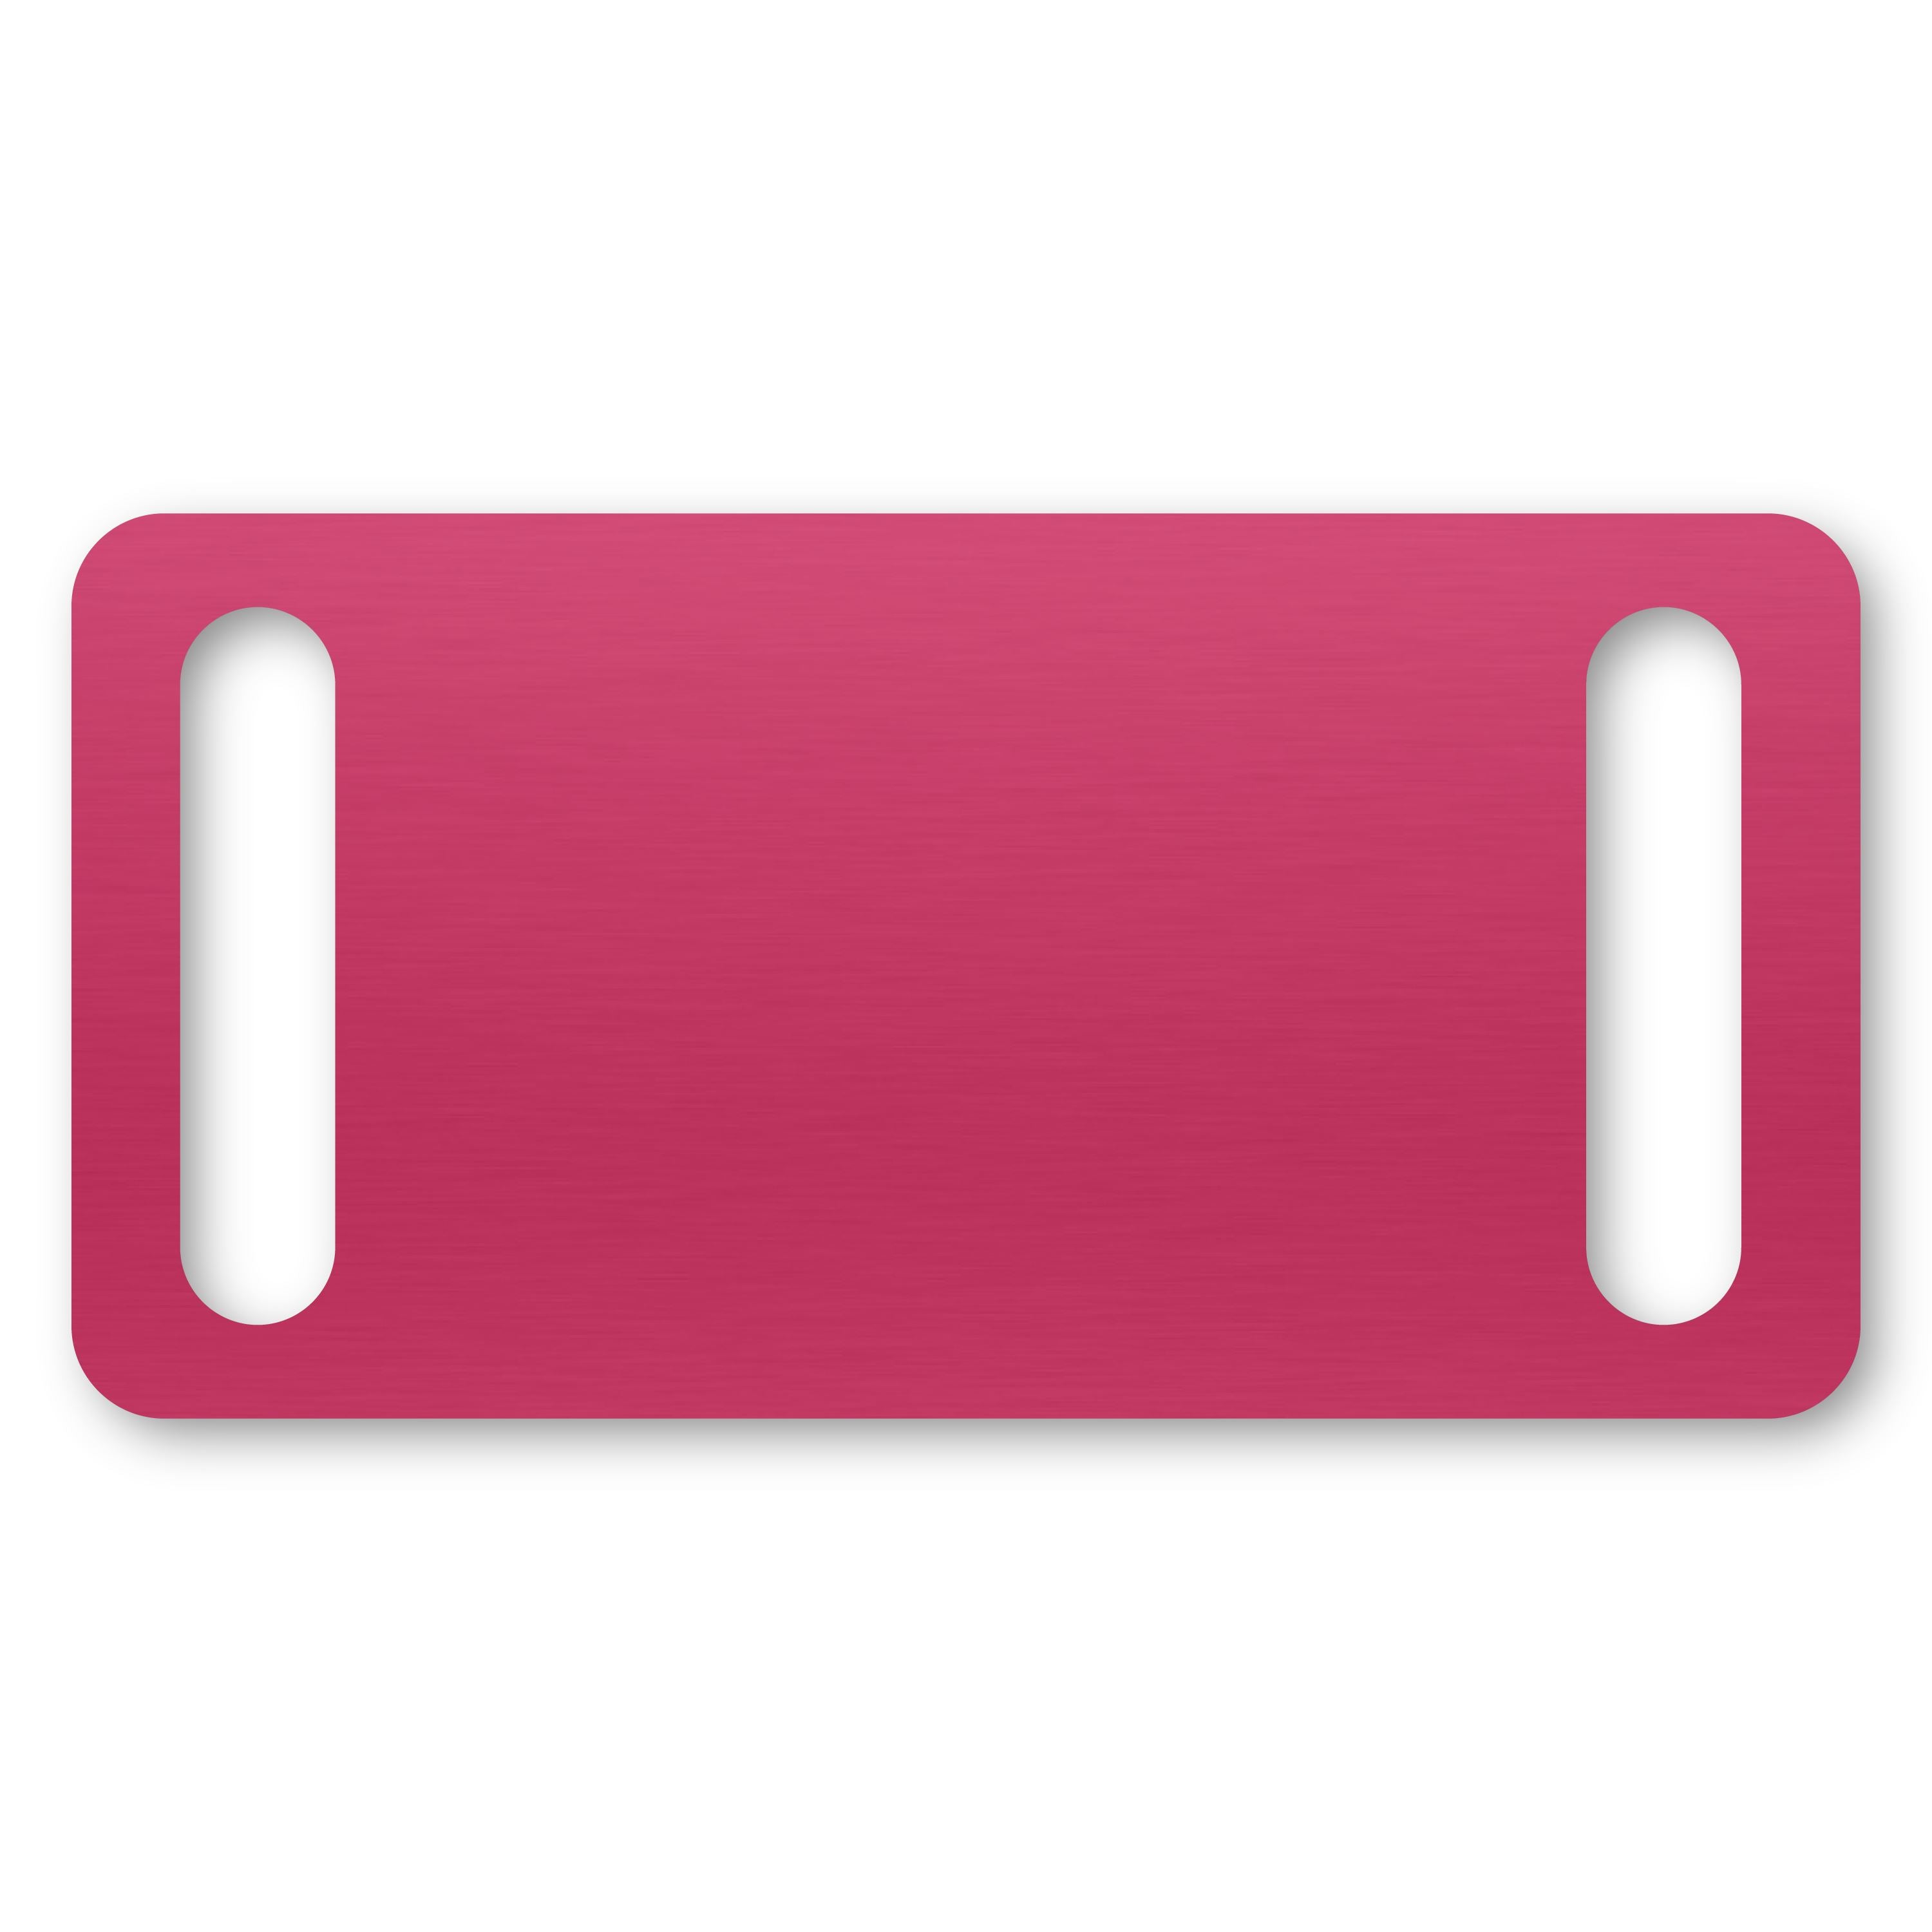 Anodized Aluminum Rectangle Slide-On Tags, 7/8" x 1-3/4" with 5/32" x 3/4" Slot, Laser Engraved Metal Tags Craftworks NW Pink 